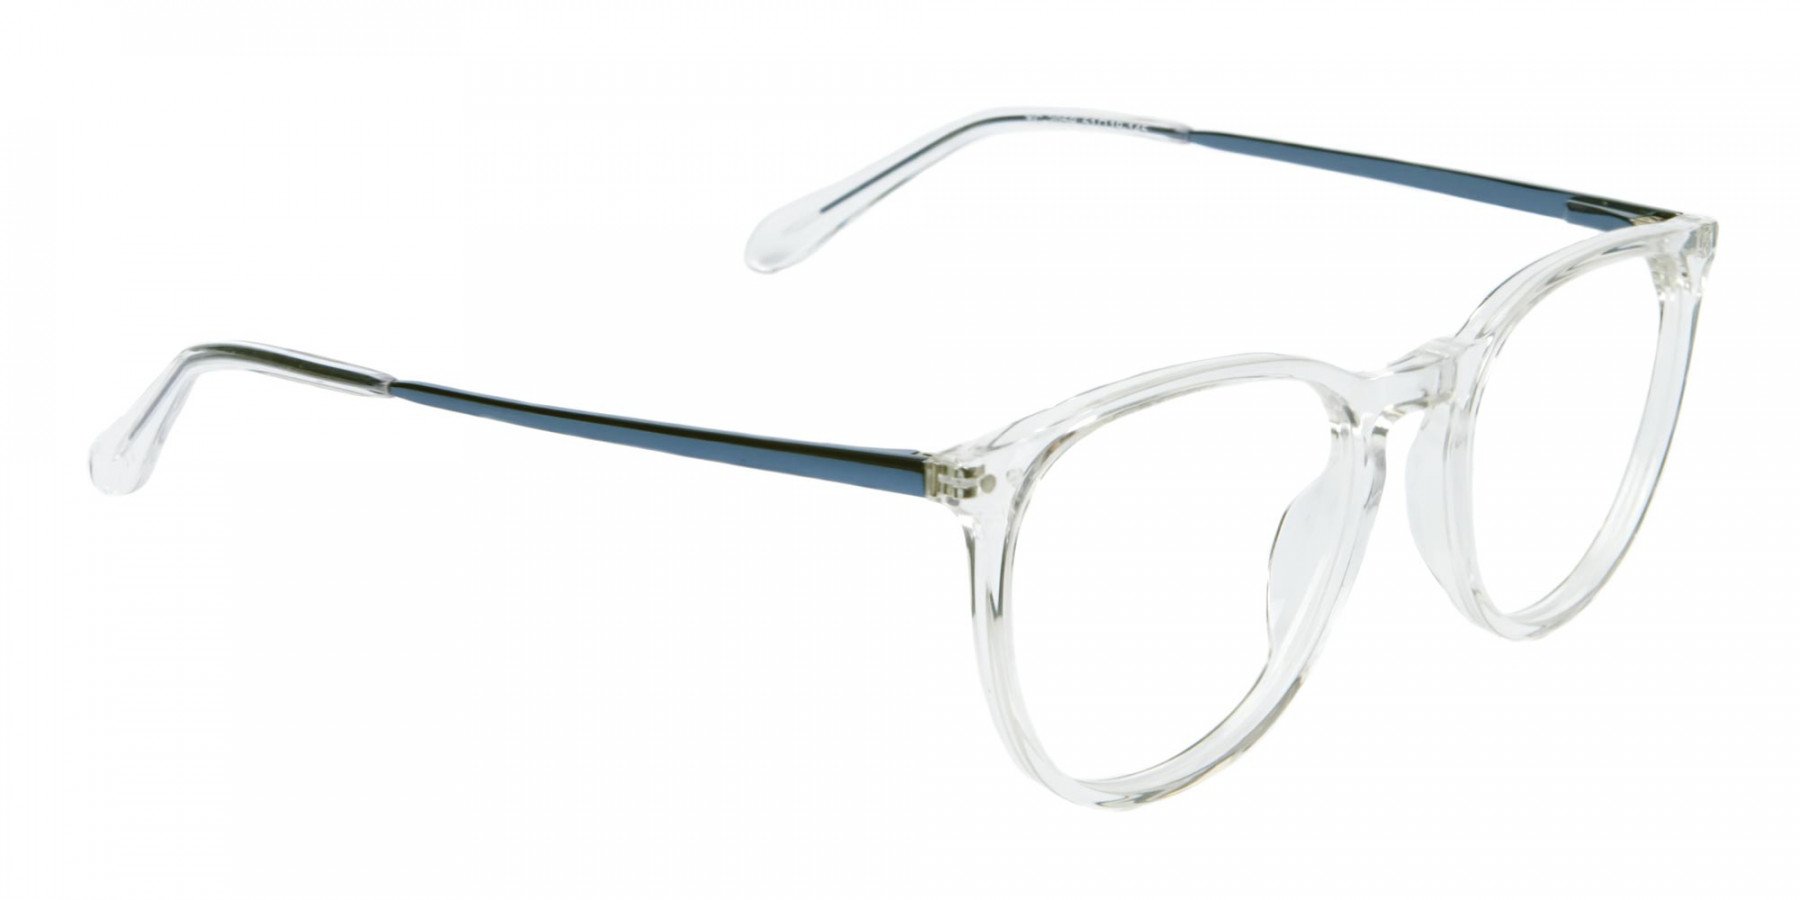 Rimless-Alike Crystal Clear Glasses